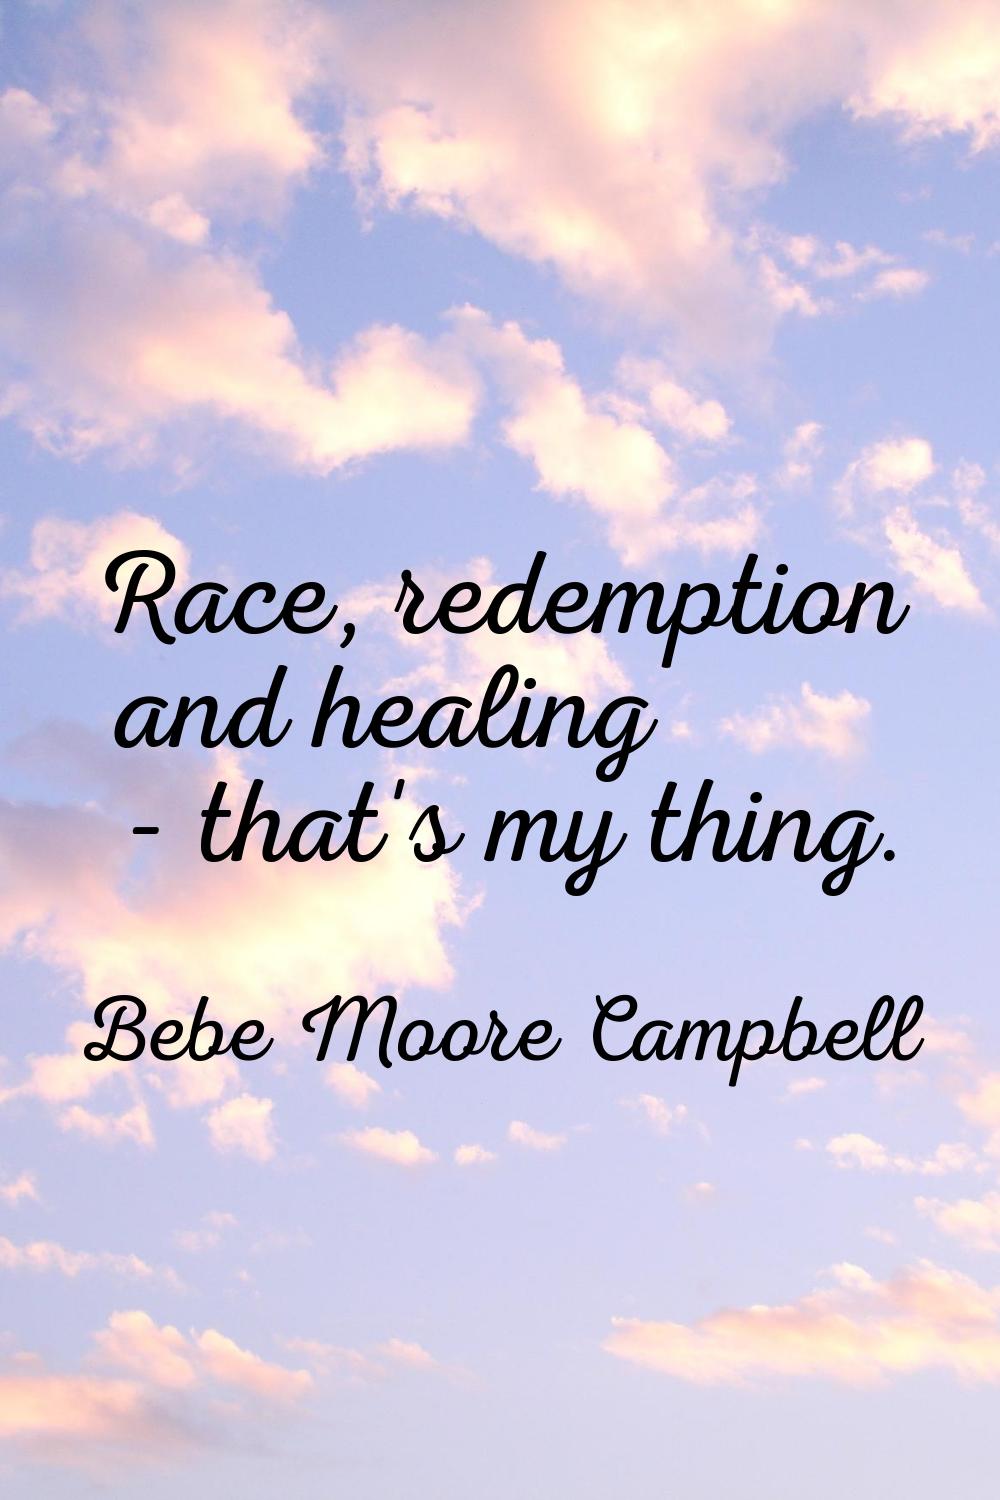 Race, redemption and healing - that's my thing.